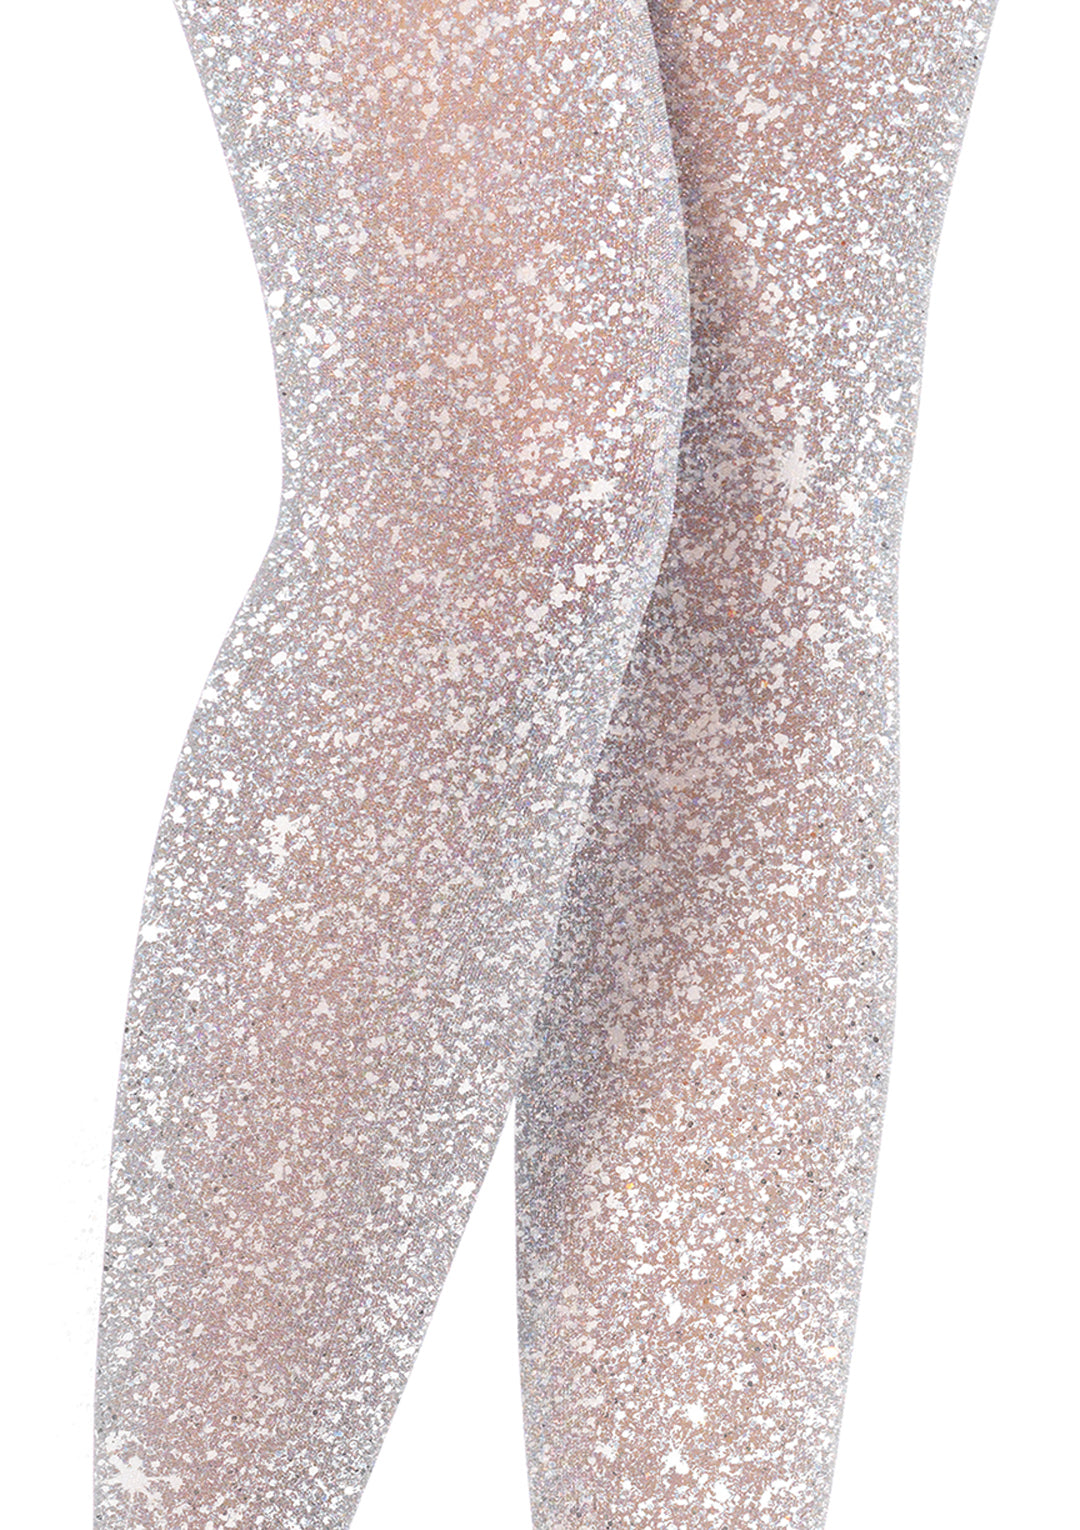 Lurex Glitter Fashion Tights LA7120, Leg Avenue, Colored Specialty  Prints, Patterned Tights, Holiday Tights, Specialty Print Pantyhose, Black, Purple, Blue, Red, Pink